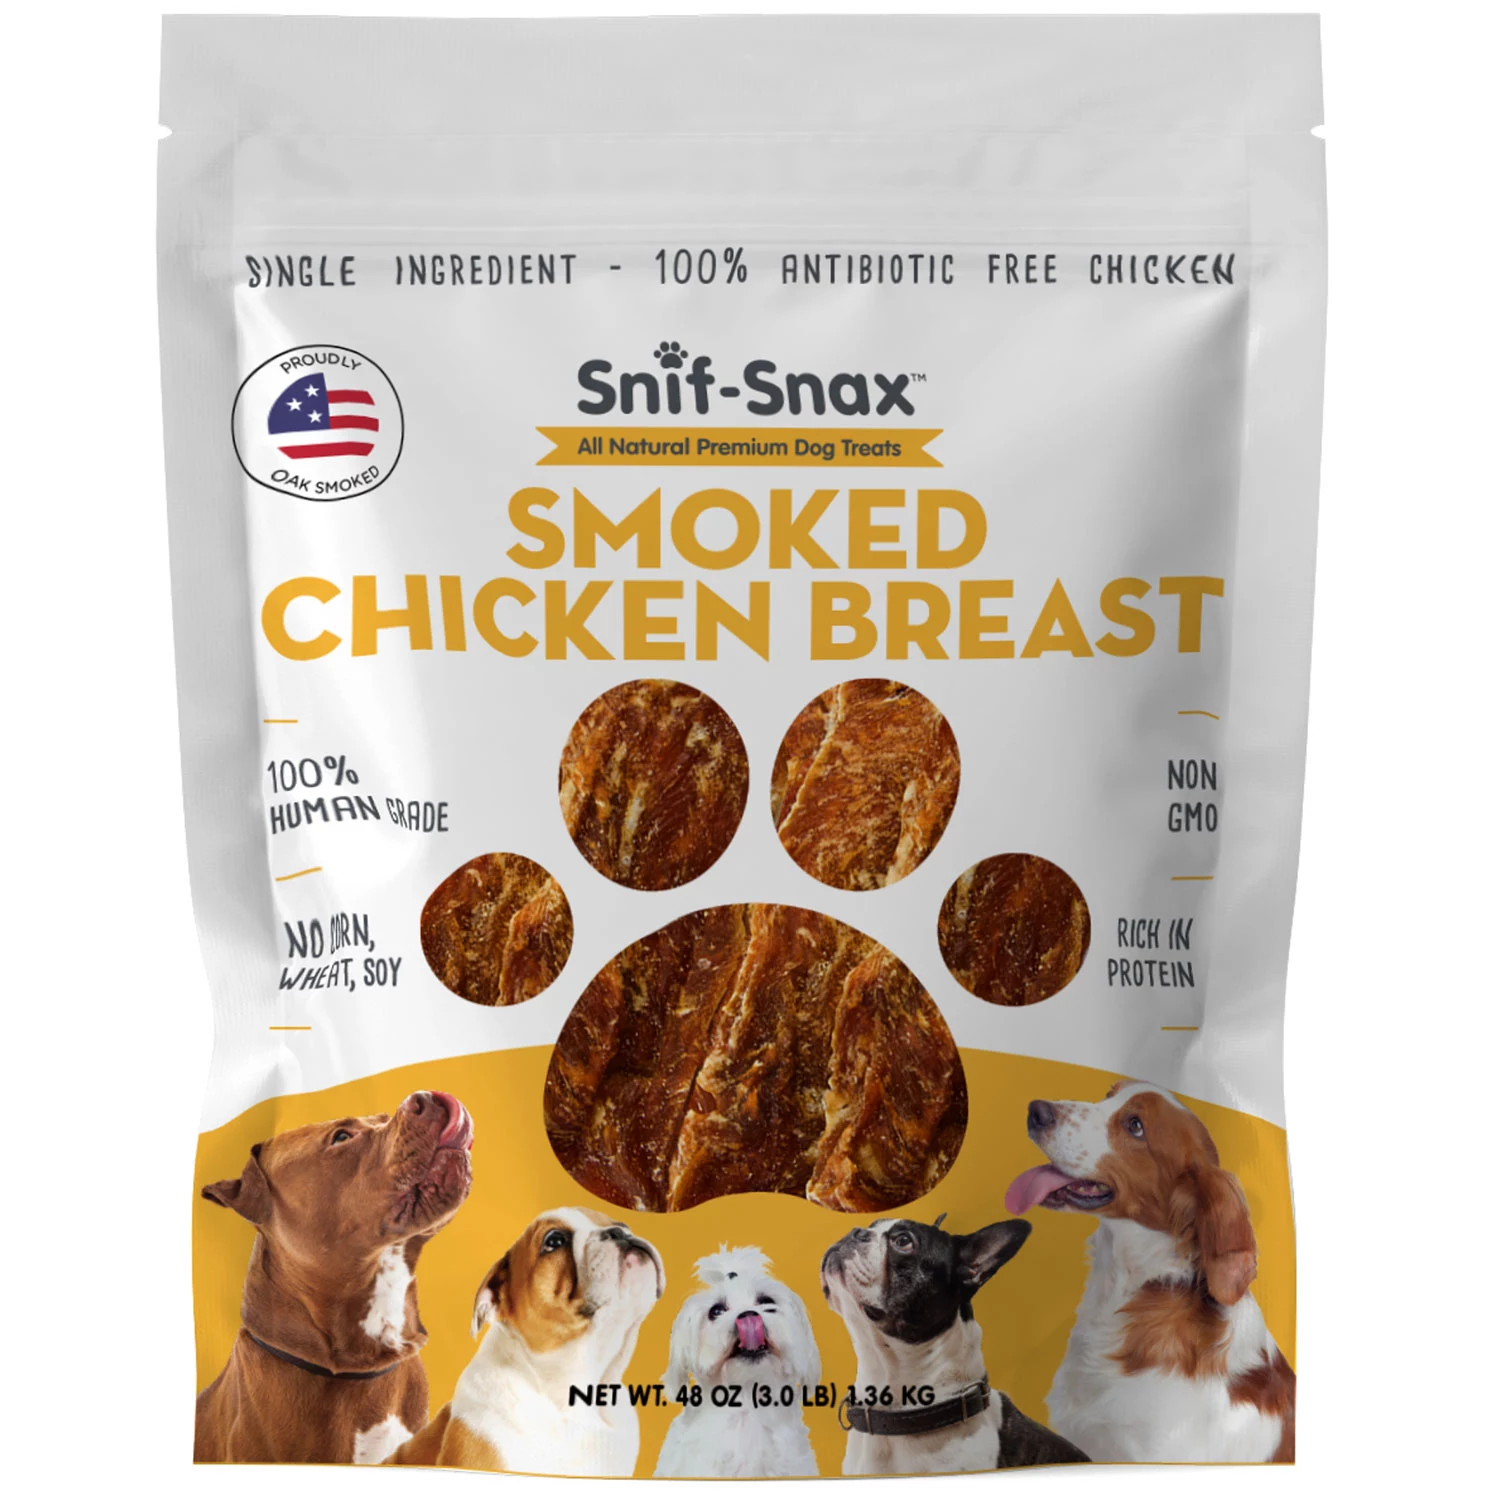 Snif-Snax: Handcrafted Sustainably Sourced Dog Treats